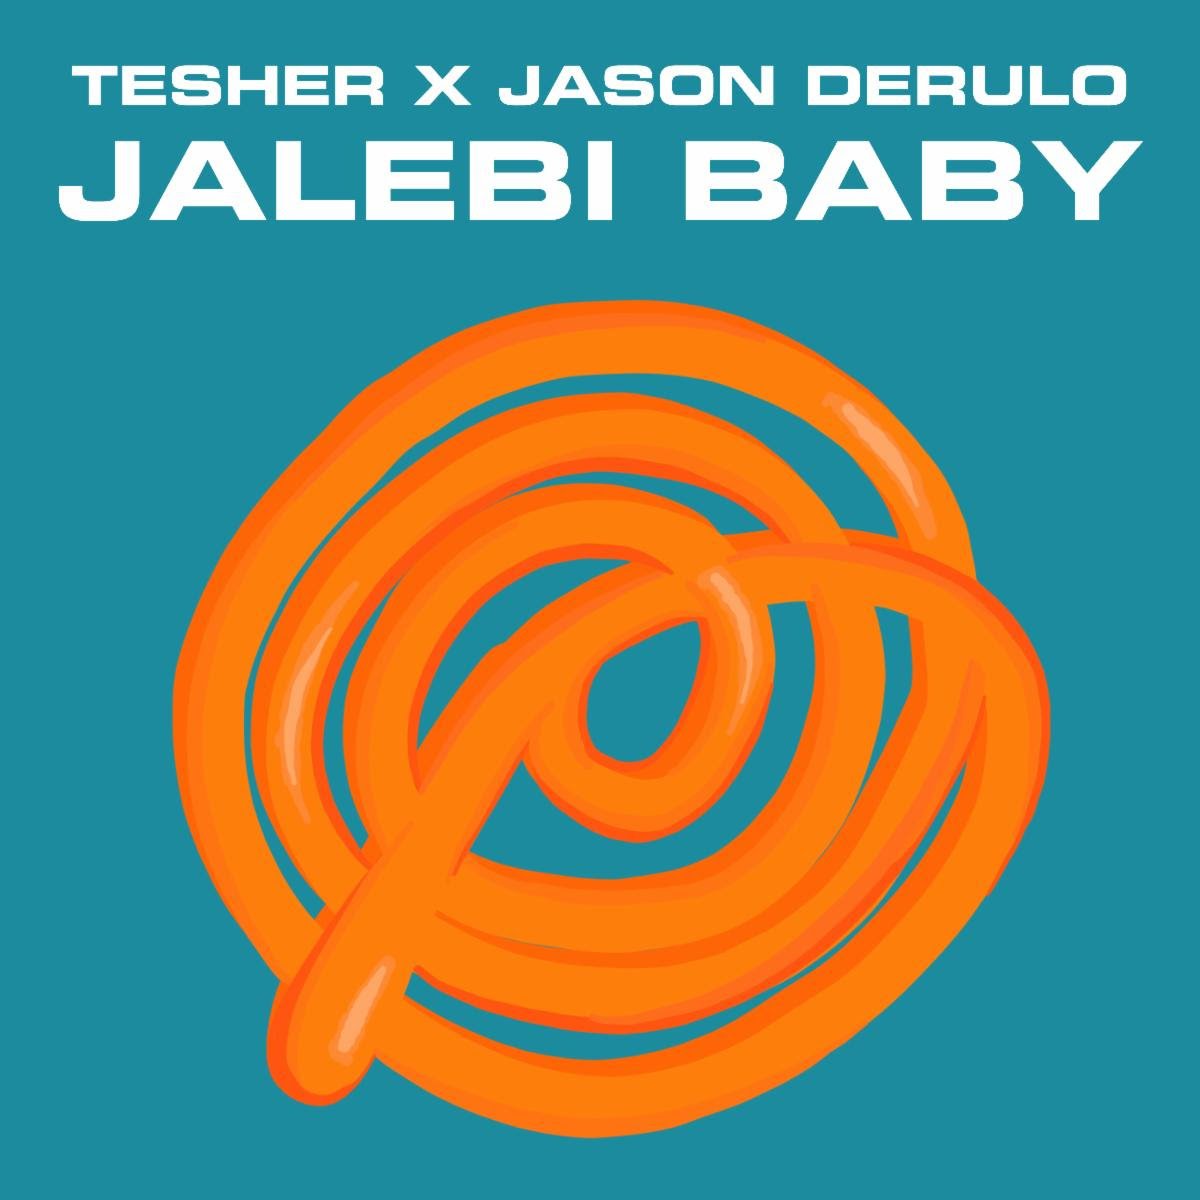 Jalebi Baby courtesy of Capitol Music Group for use by 360 Magazine